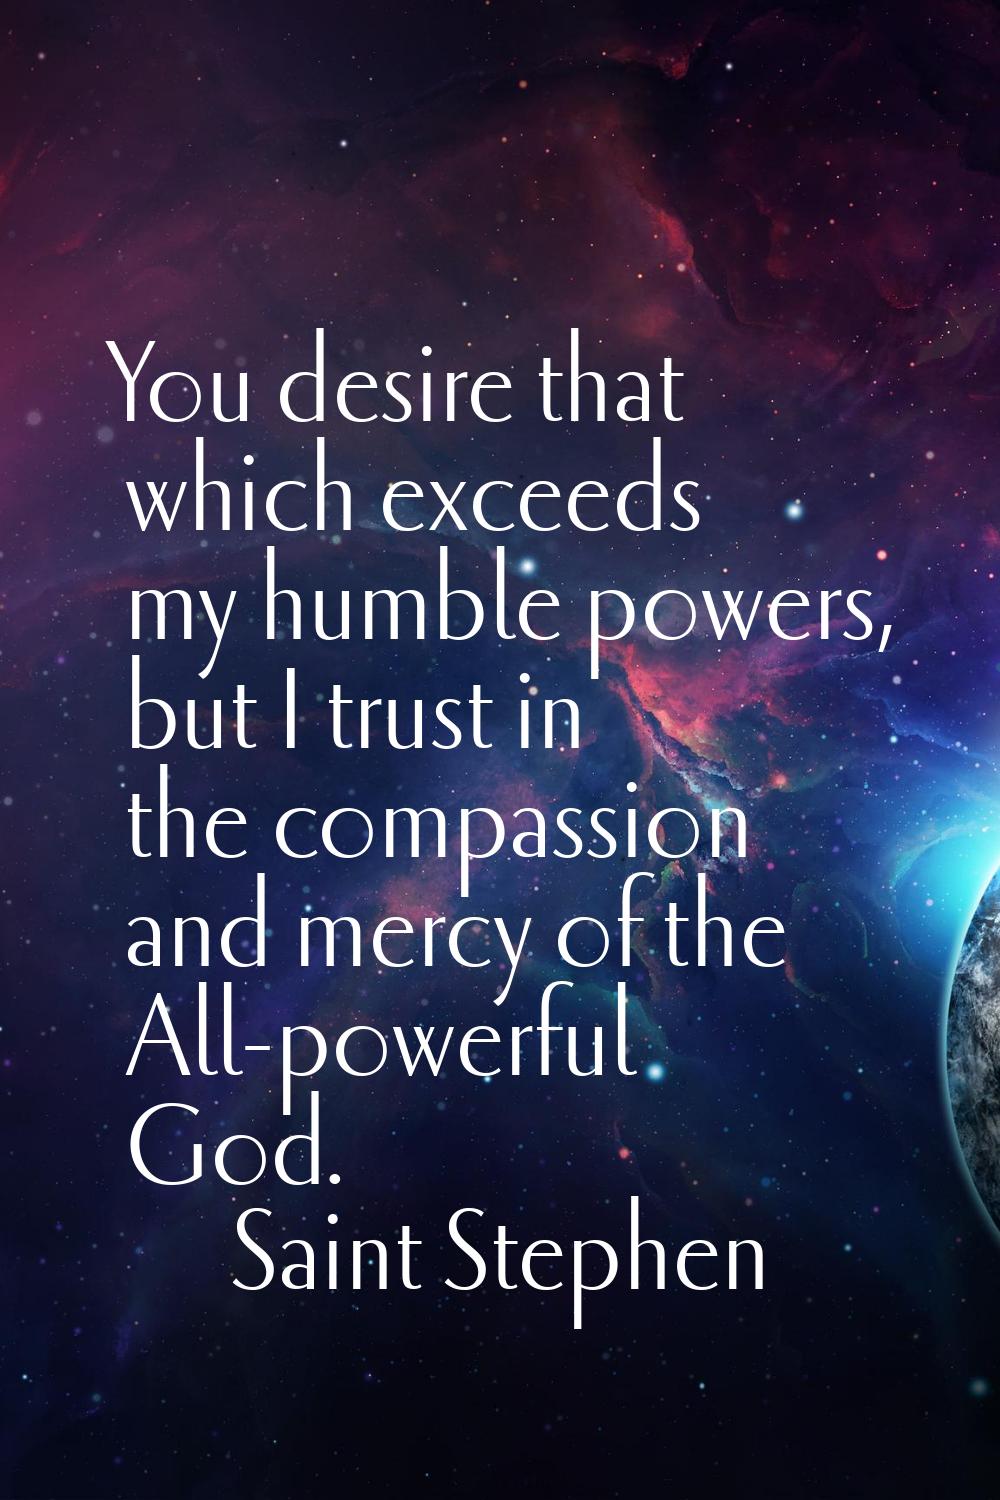 You desire that which exceeds my humble powers, but I trust in the compassion and mercy of the All-